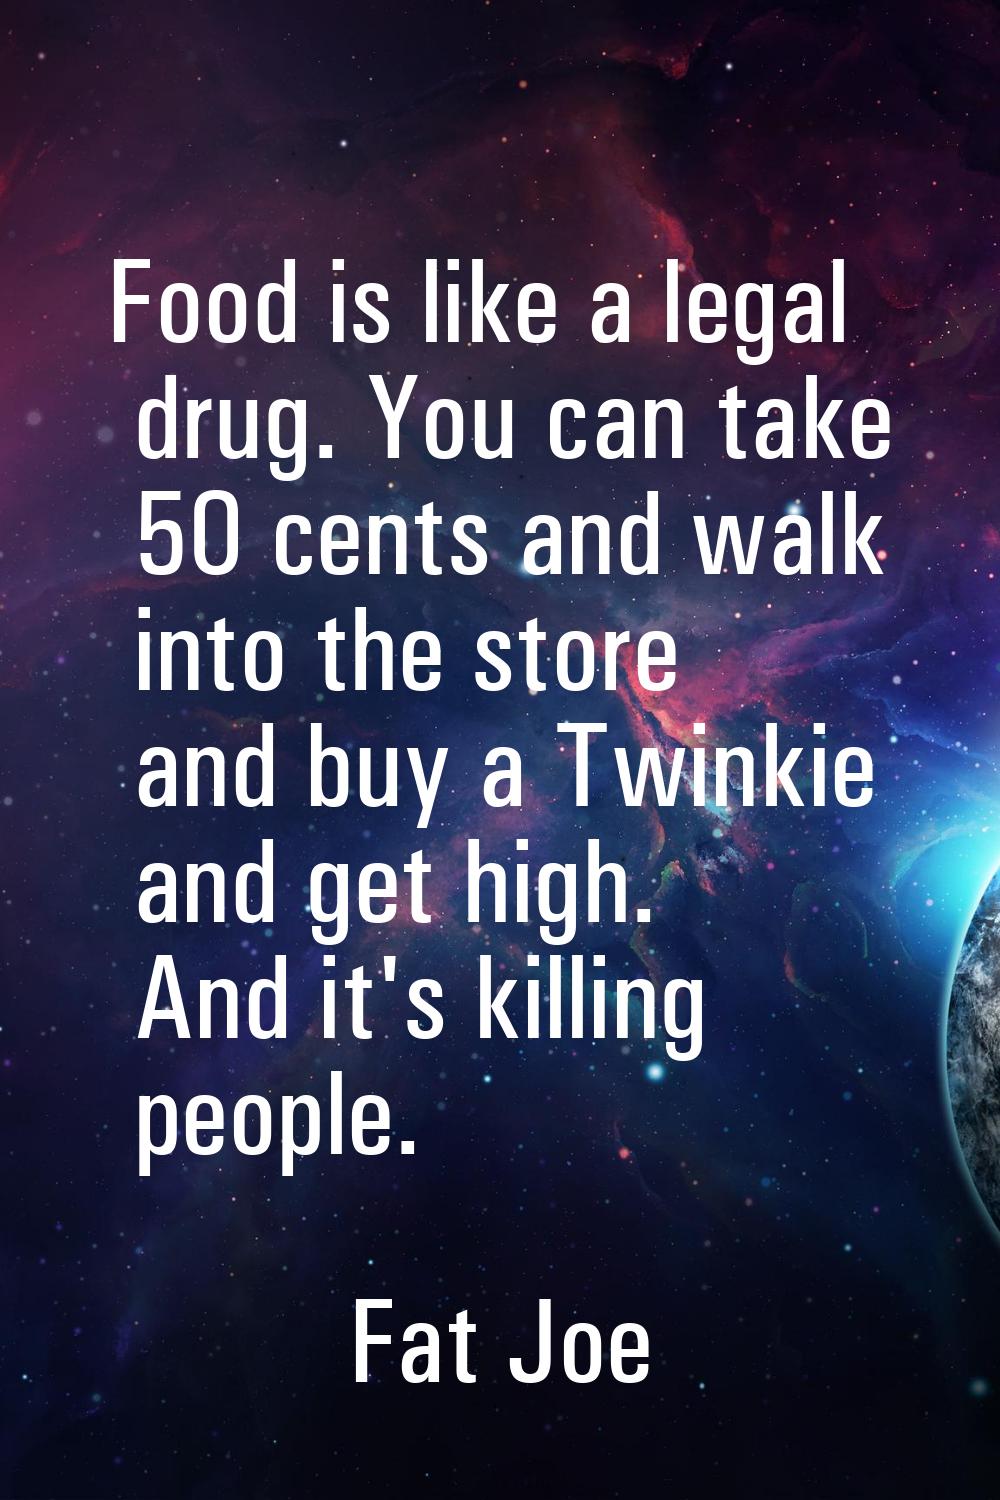 Food is like a legal drug. You can take 50 cents and walk into the store and buy a Twinkie and get 